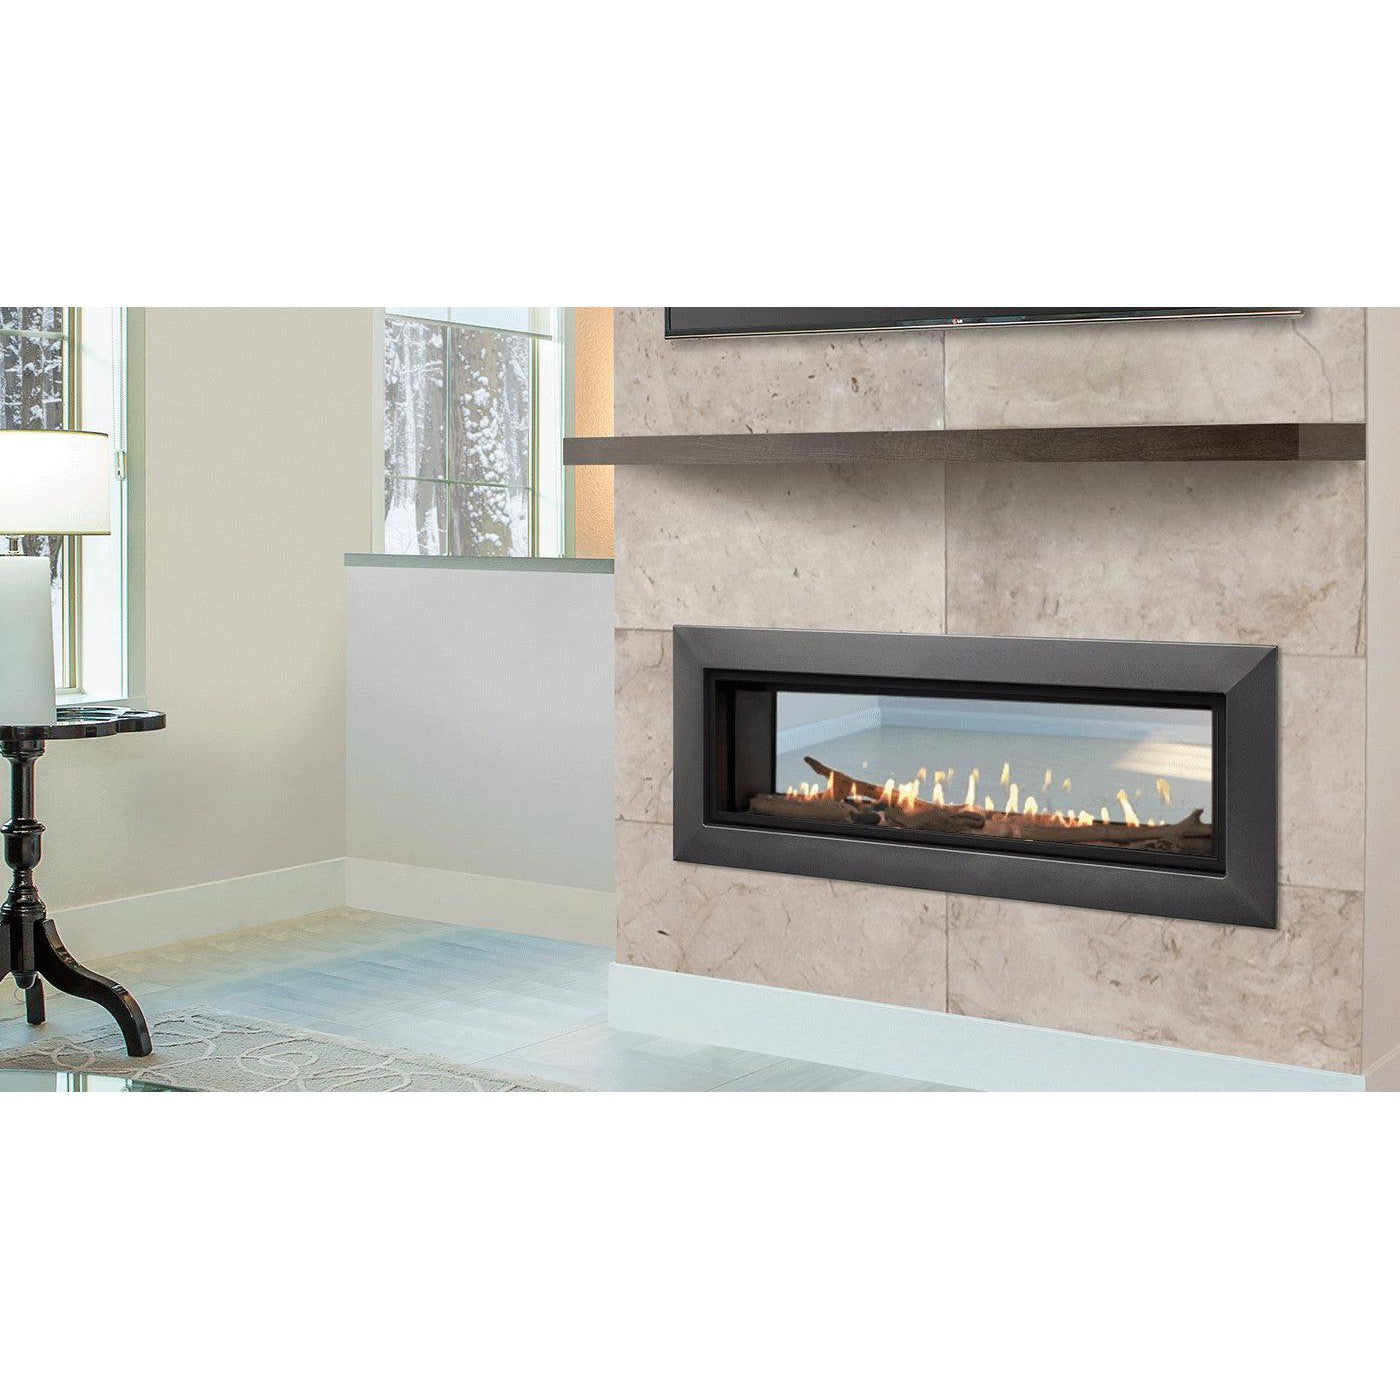 Majestic Echelon II See-Through 36" Linear Contemporary Direct Vent Natural Gas Fireplace With IntelliFire Touch Ignition System